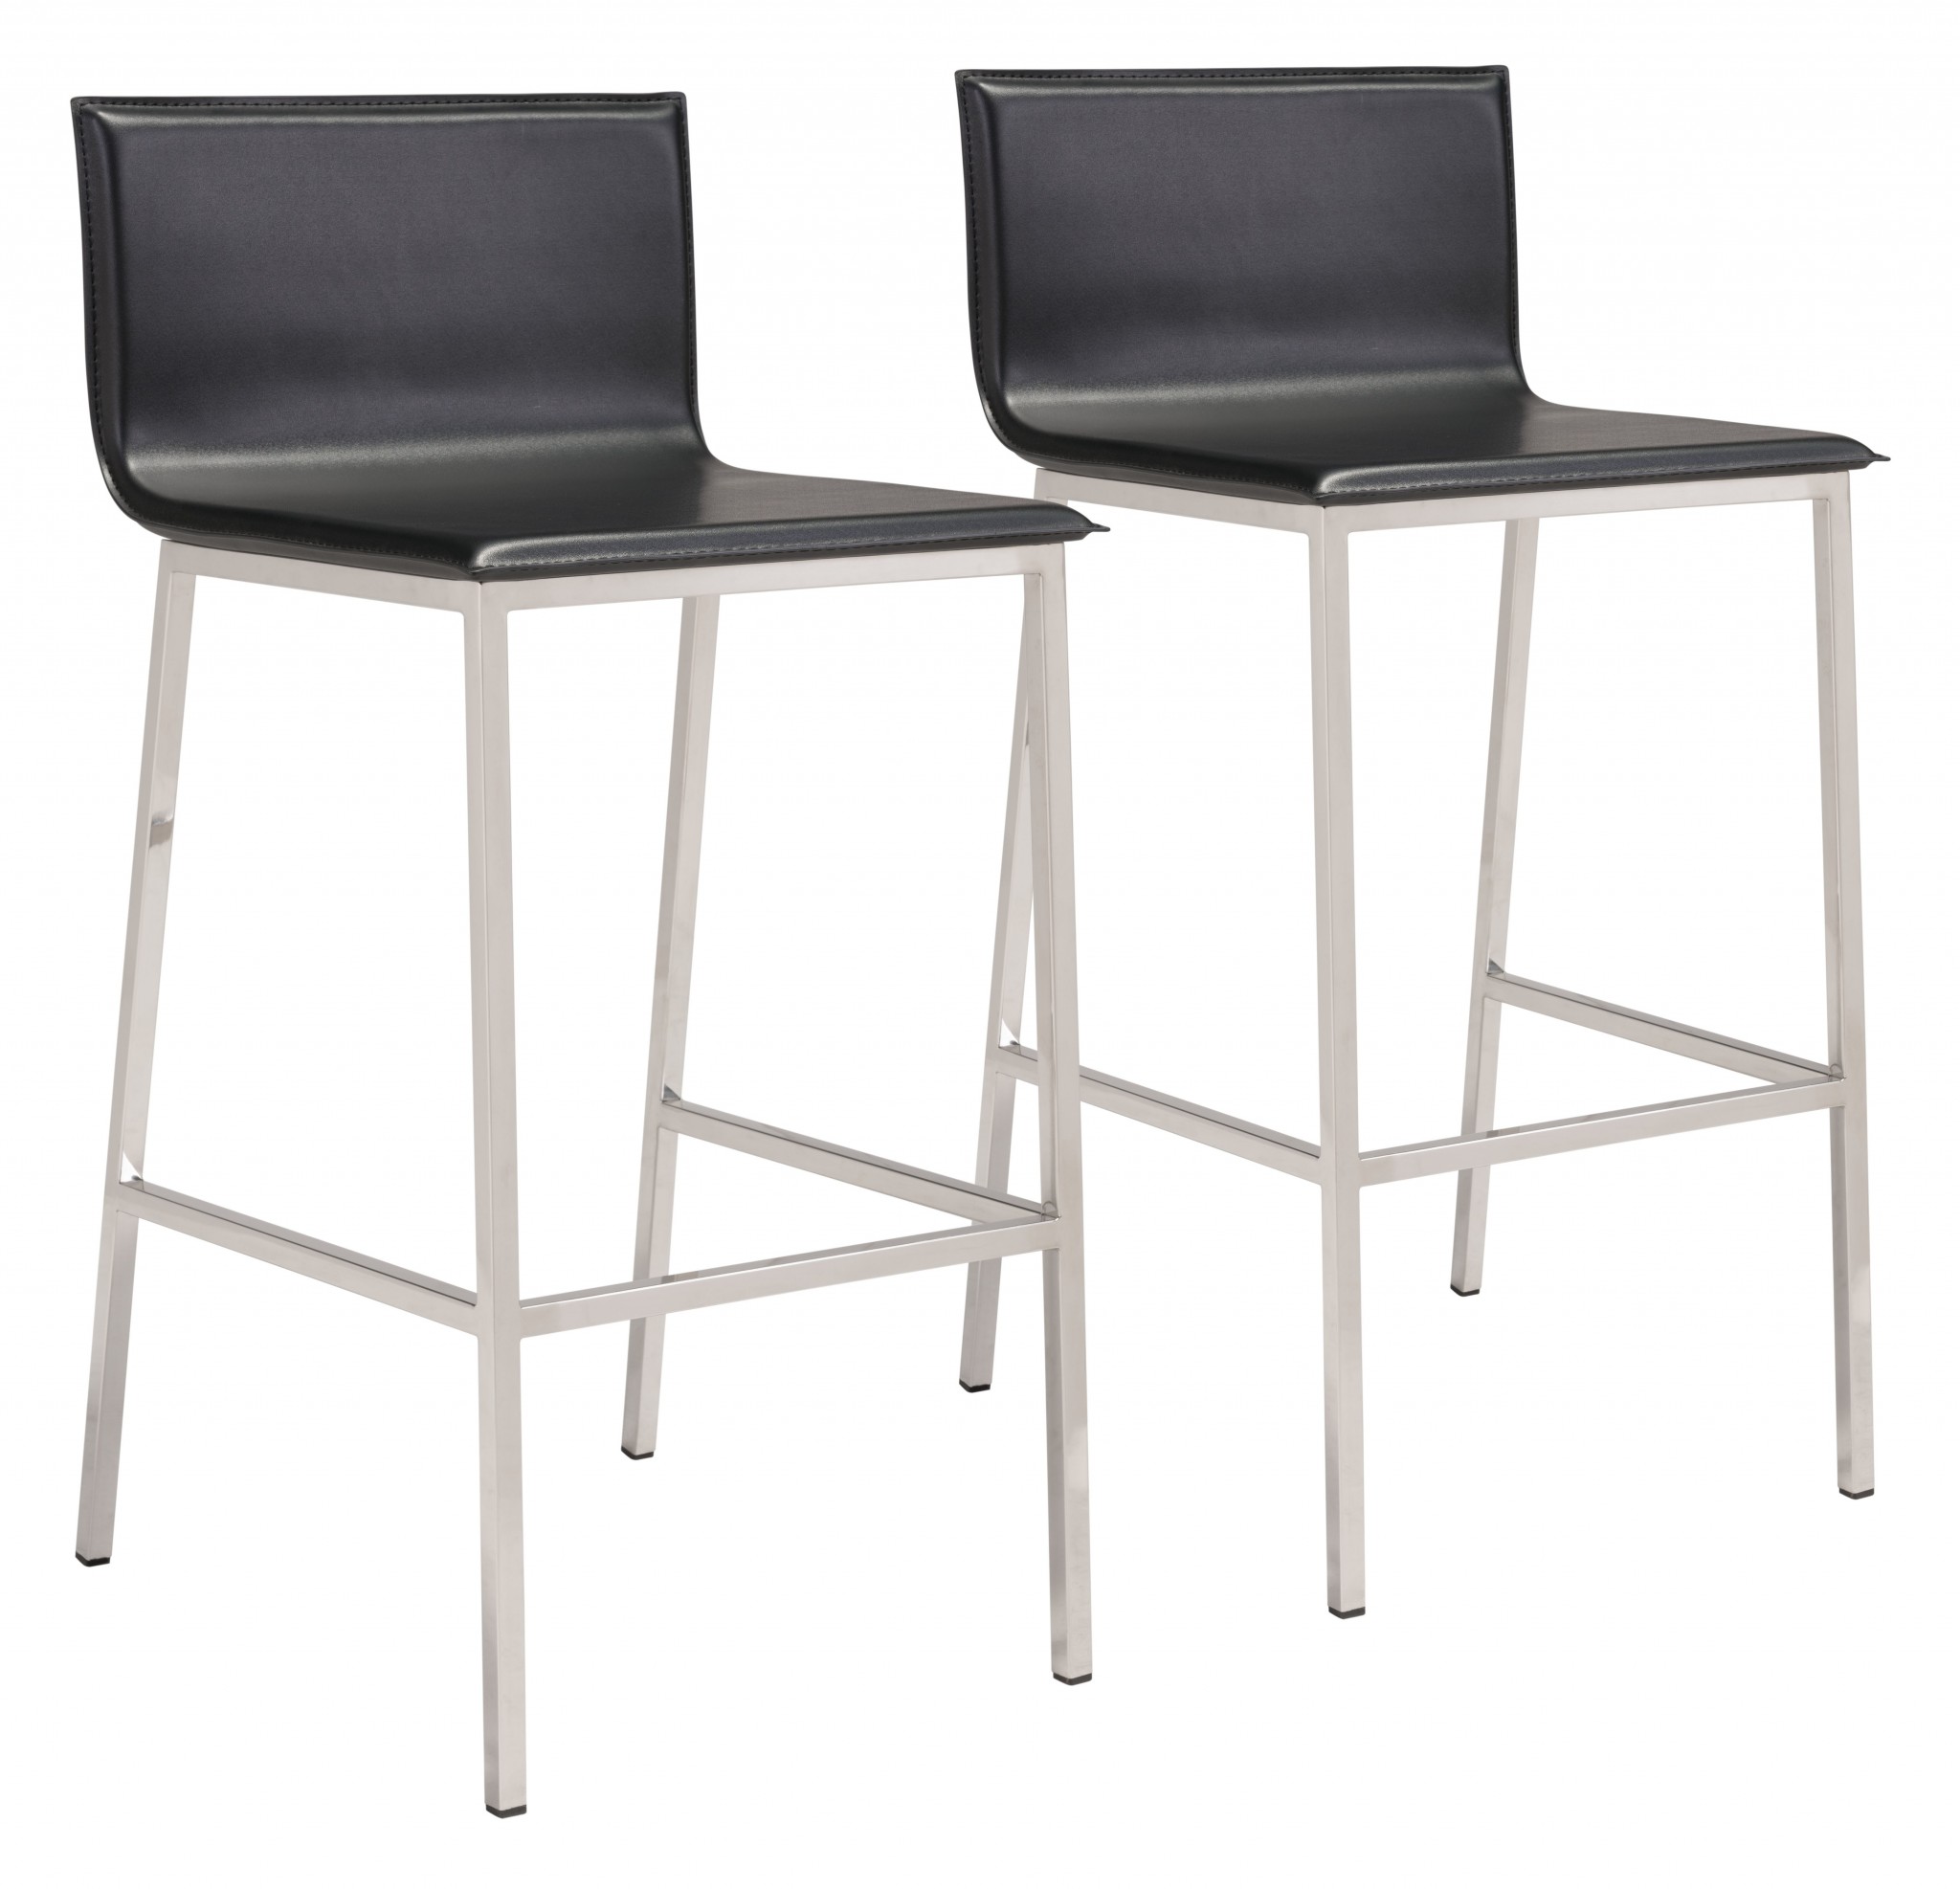 Set of Two Designer Black Faux Leather and Steel Barstools